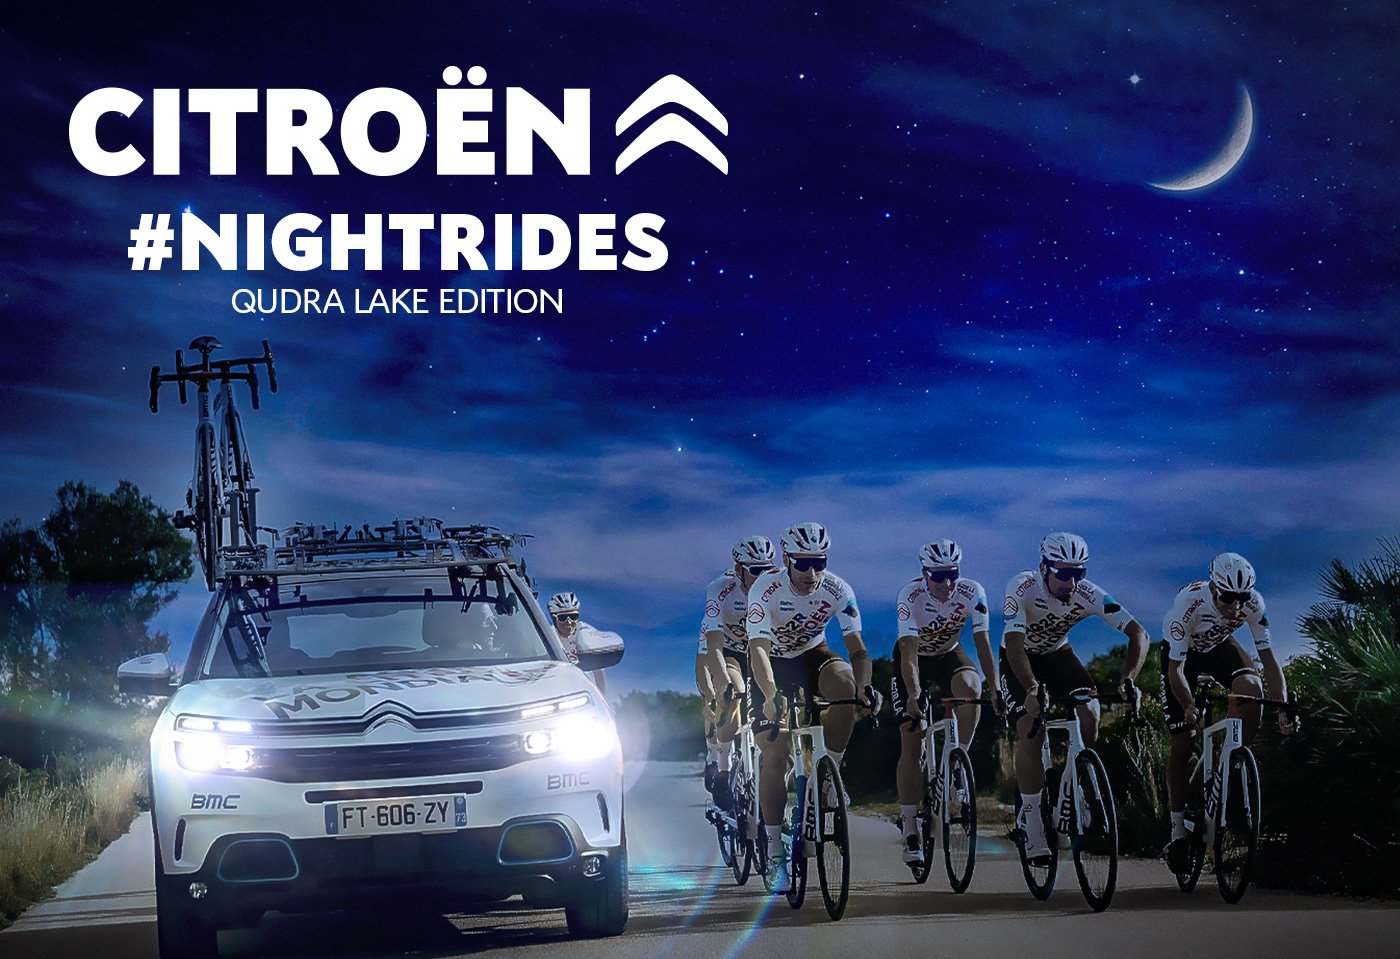 CITROËN launches NIGHTRIDES during Ramadan to raise Cancer Research awareness in the Gulf region